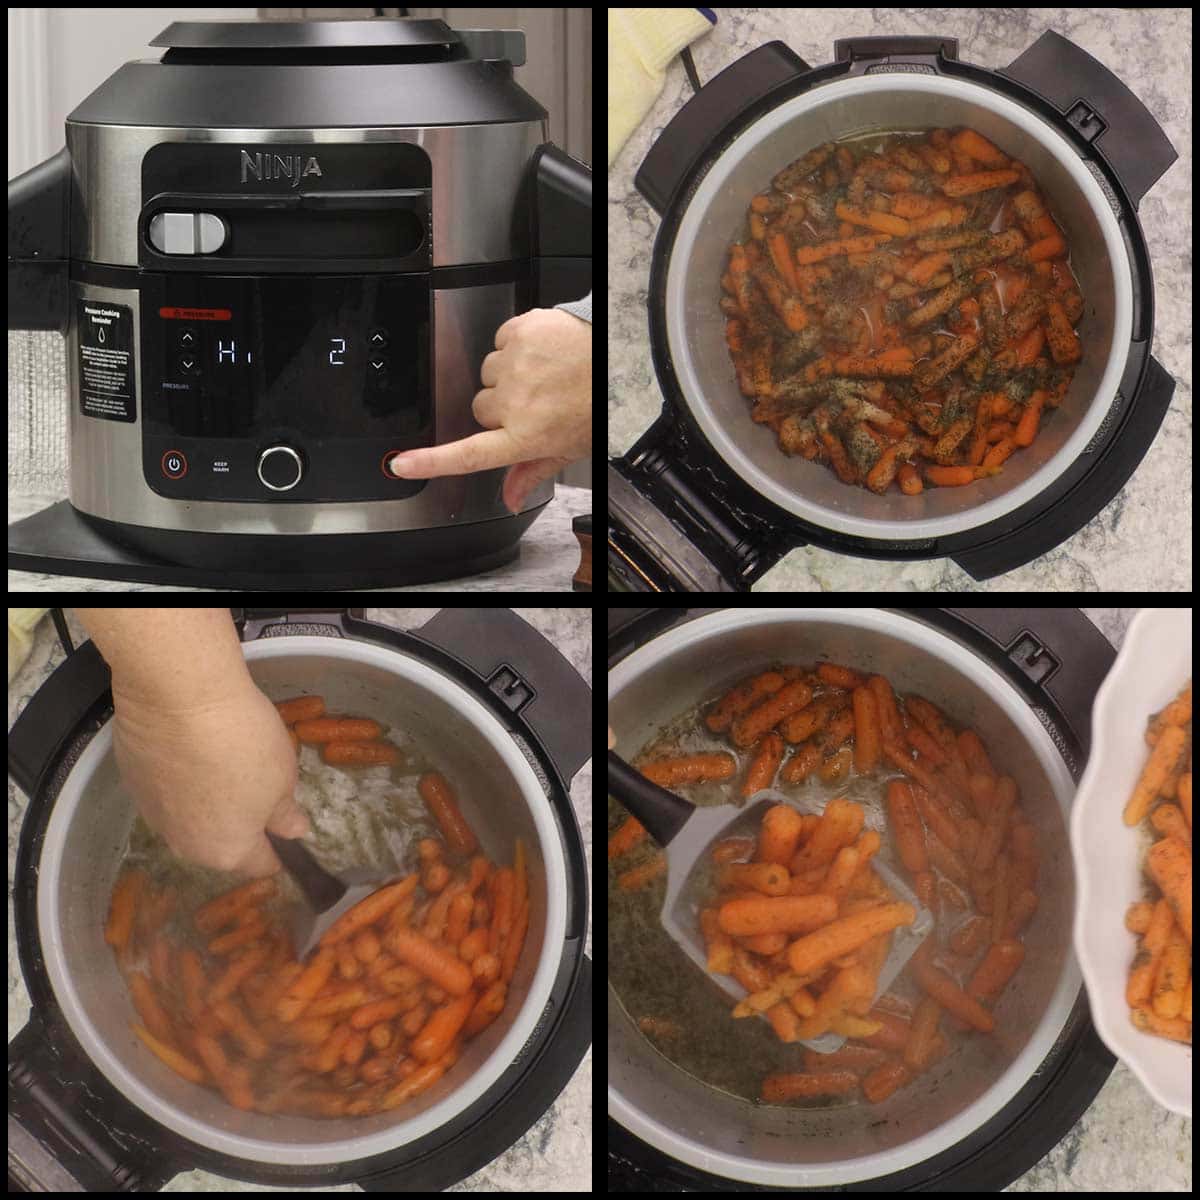 scooping the carrots out of the pressure cooker after cooking.